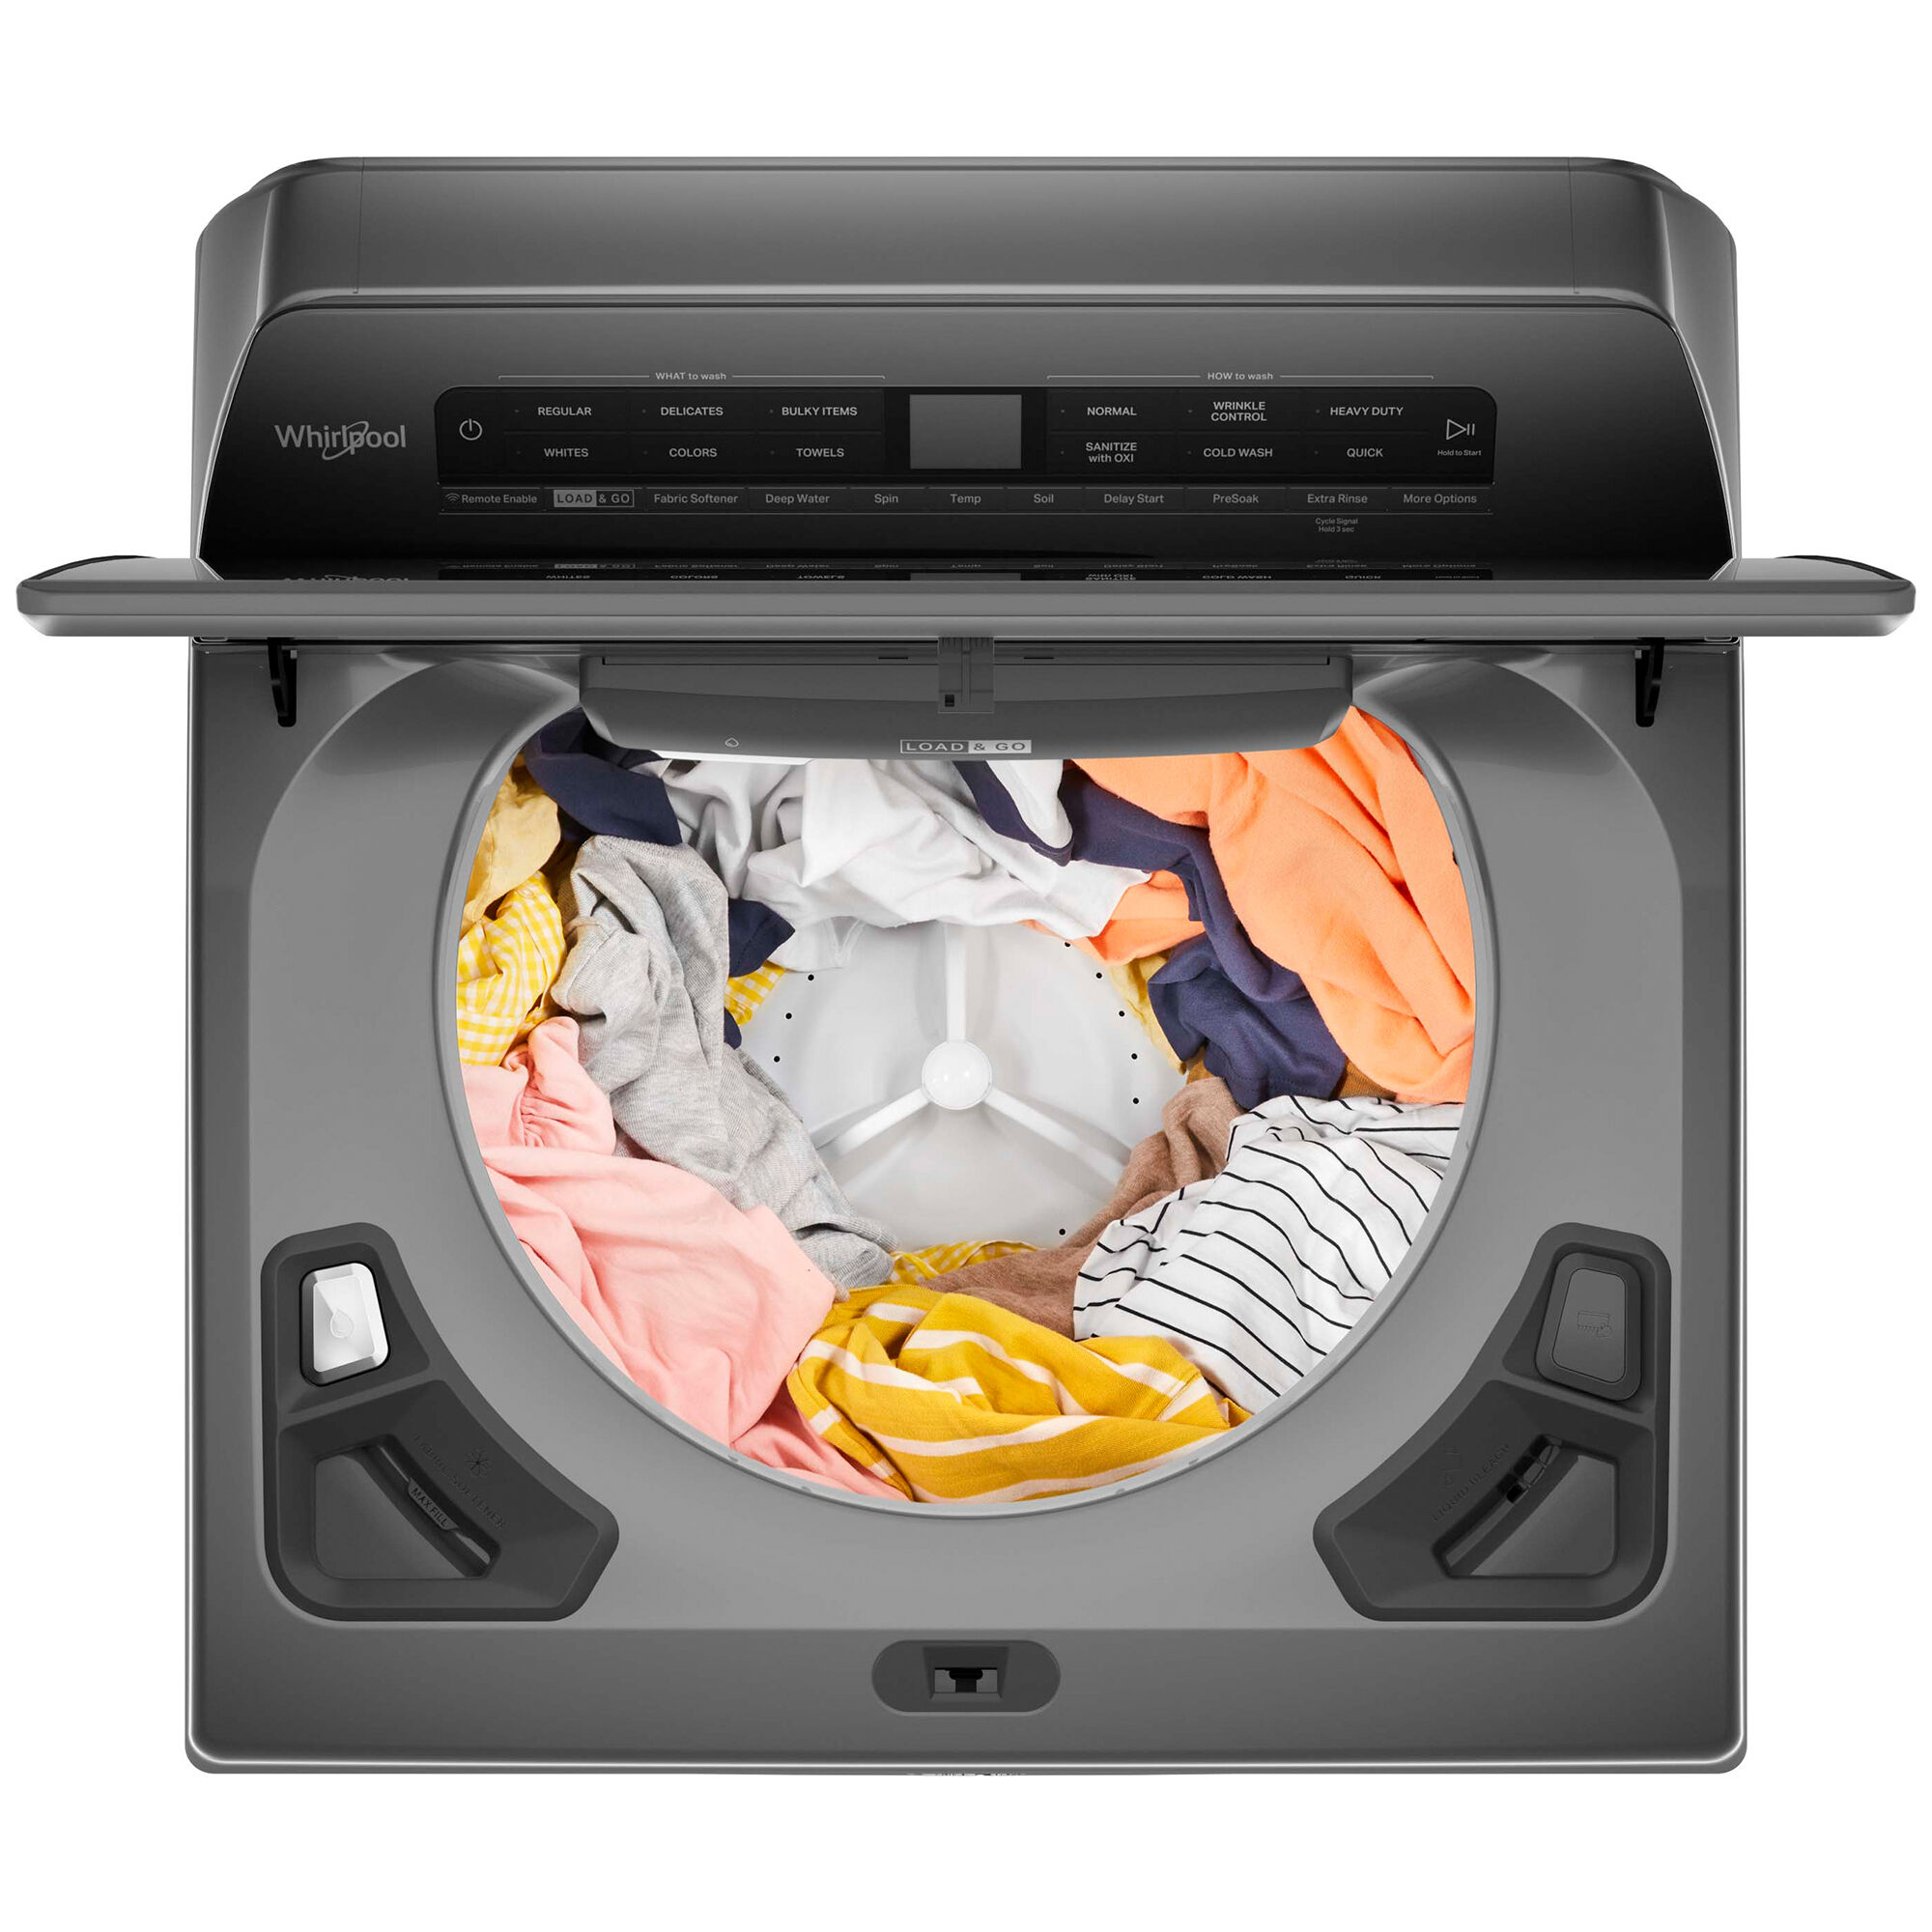 Whirlpool 27 in. 4.8 cu. ft. Smart Top Load Washer with Load & Go Dispenser  & Sanitize with Oxi - Chrome Shadow